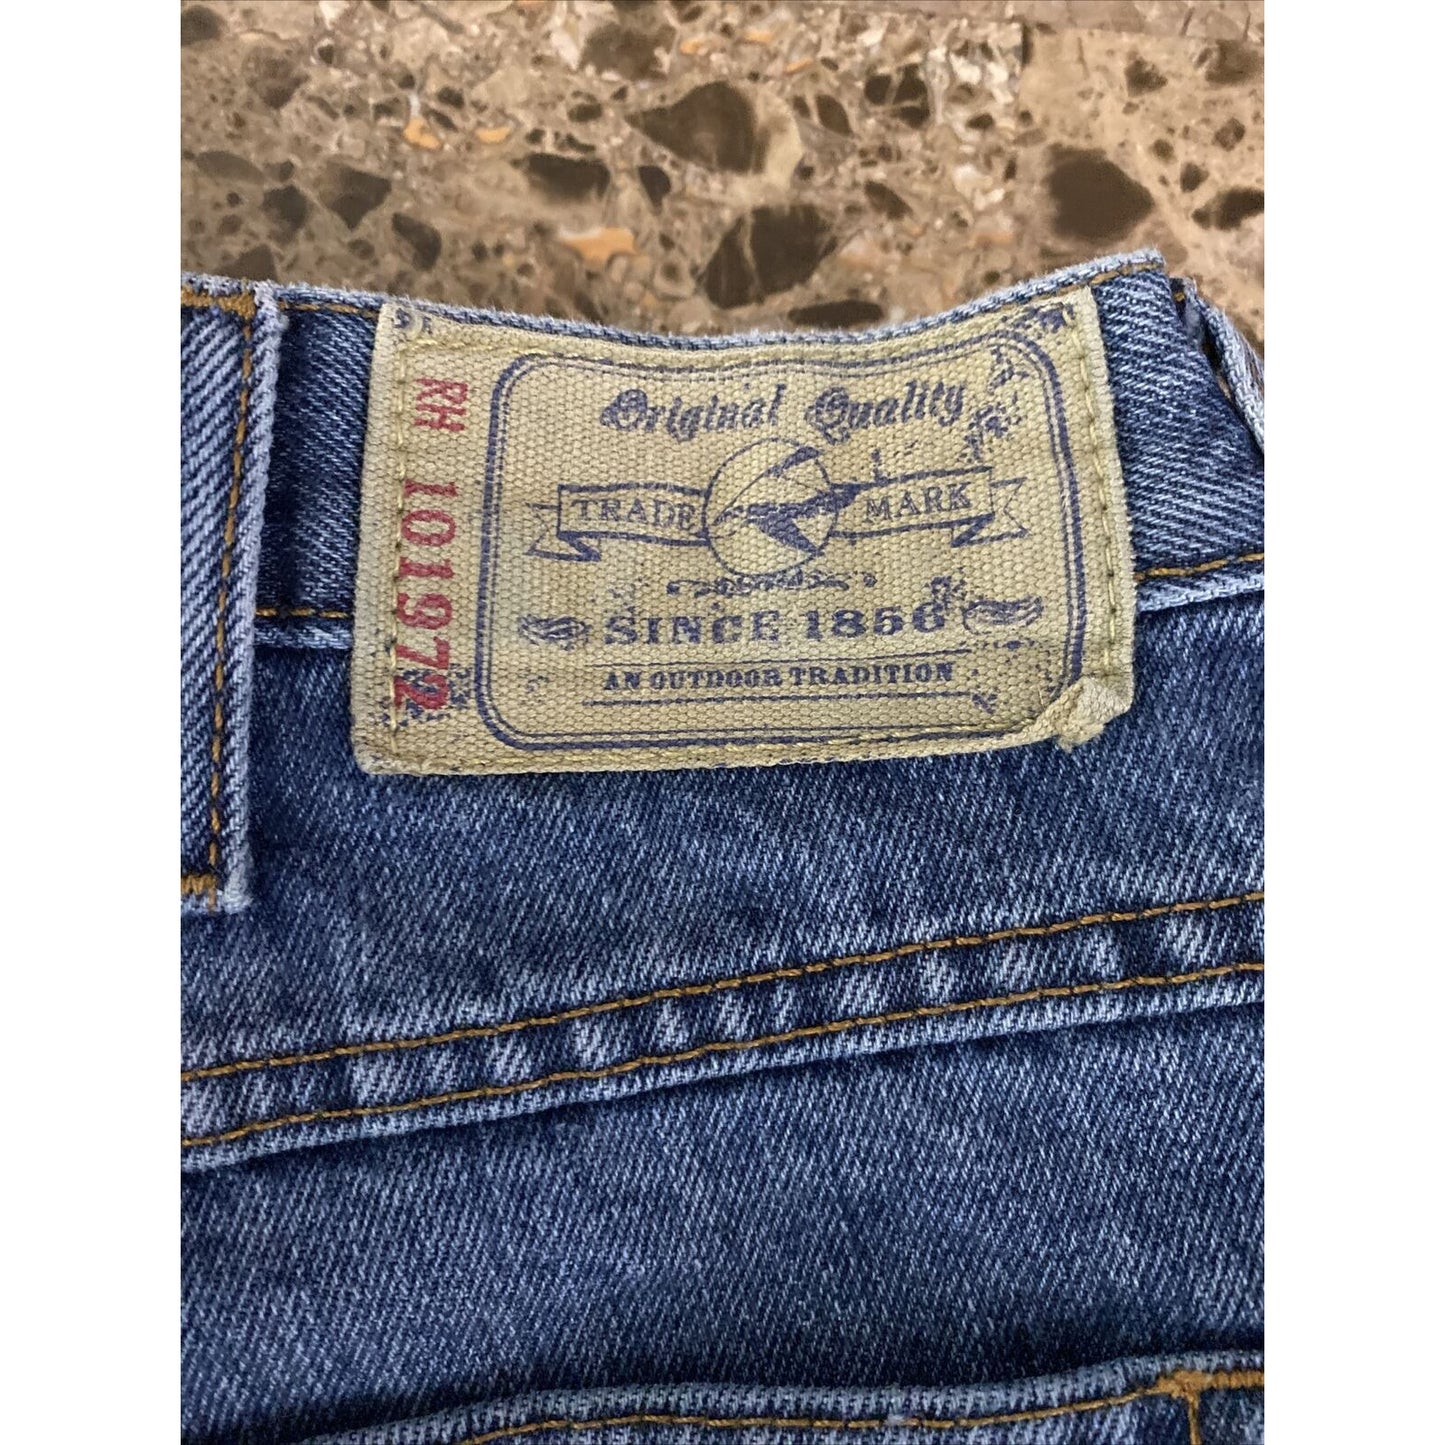 Bass Pro Shops RedHead Men’s 38x32 Relaxed Fit Blue Medium-wash Cotton Jeans